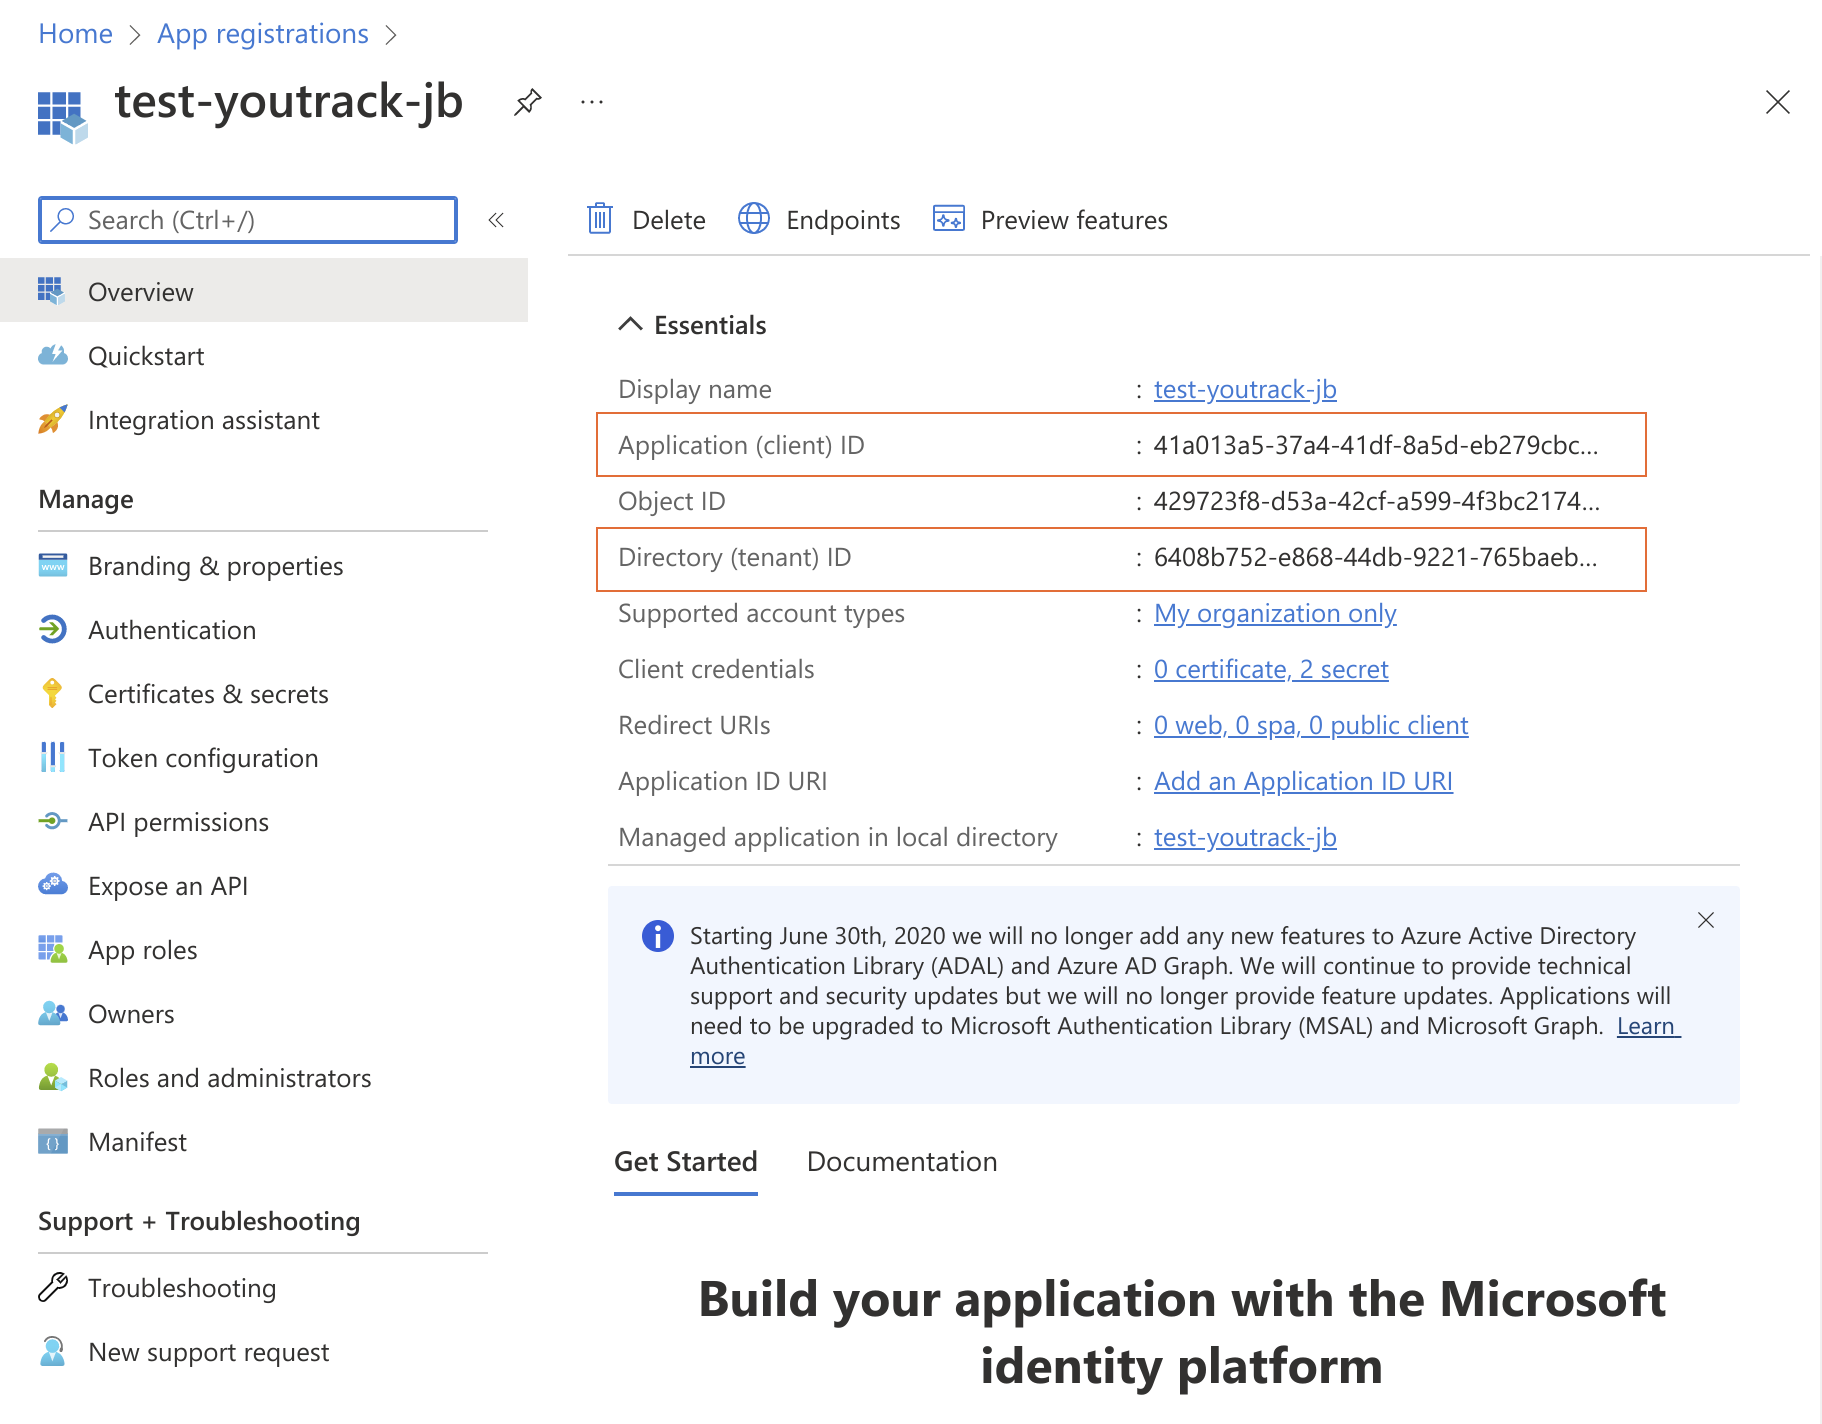 The Essentials section of a registered client application in Microsoft Azure.